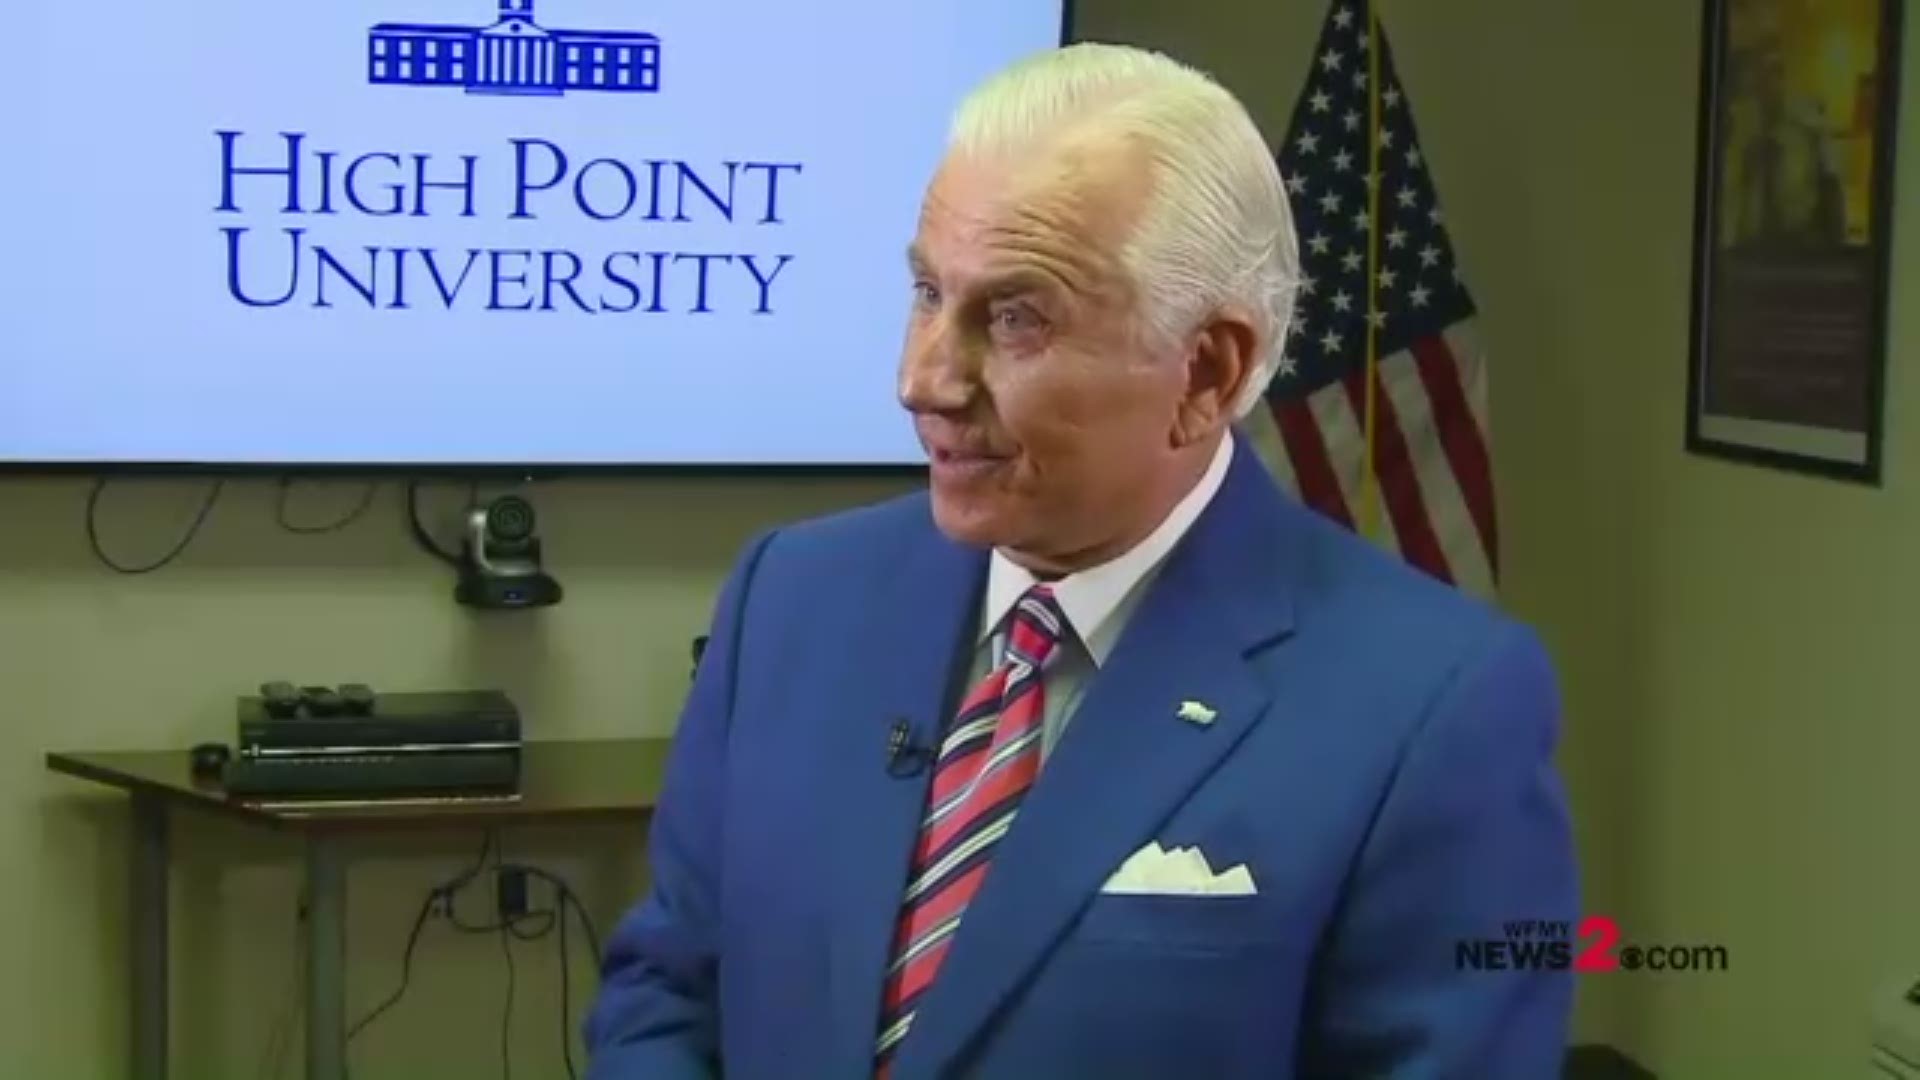 It was a group of High Point University students who noticed another student had a gun. HPU President Nido Qubein addresses the shooting response.